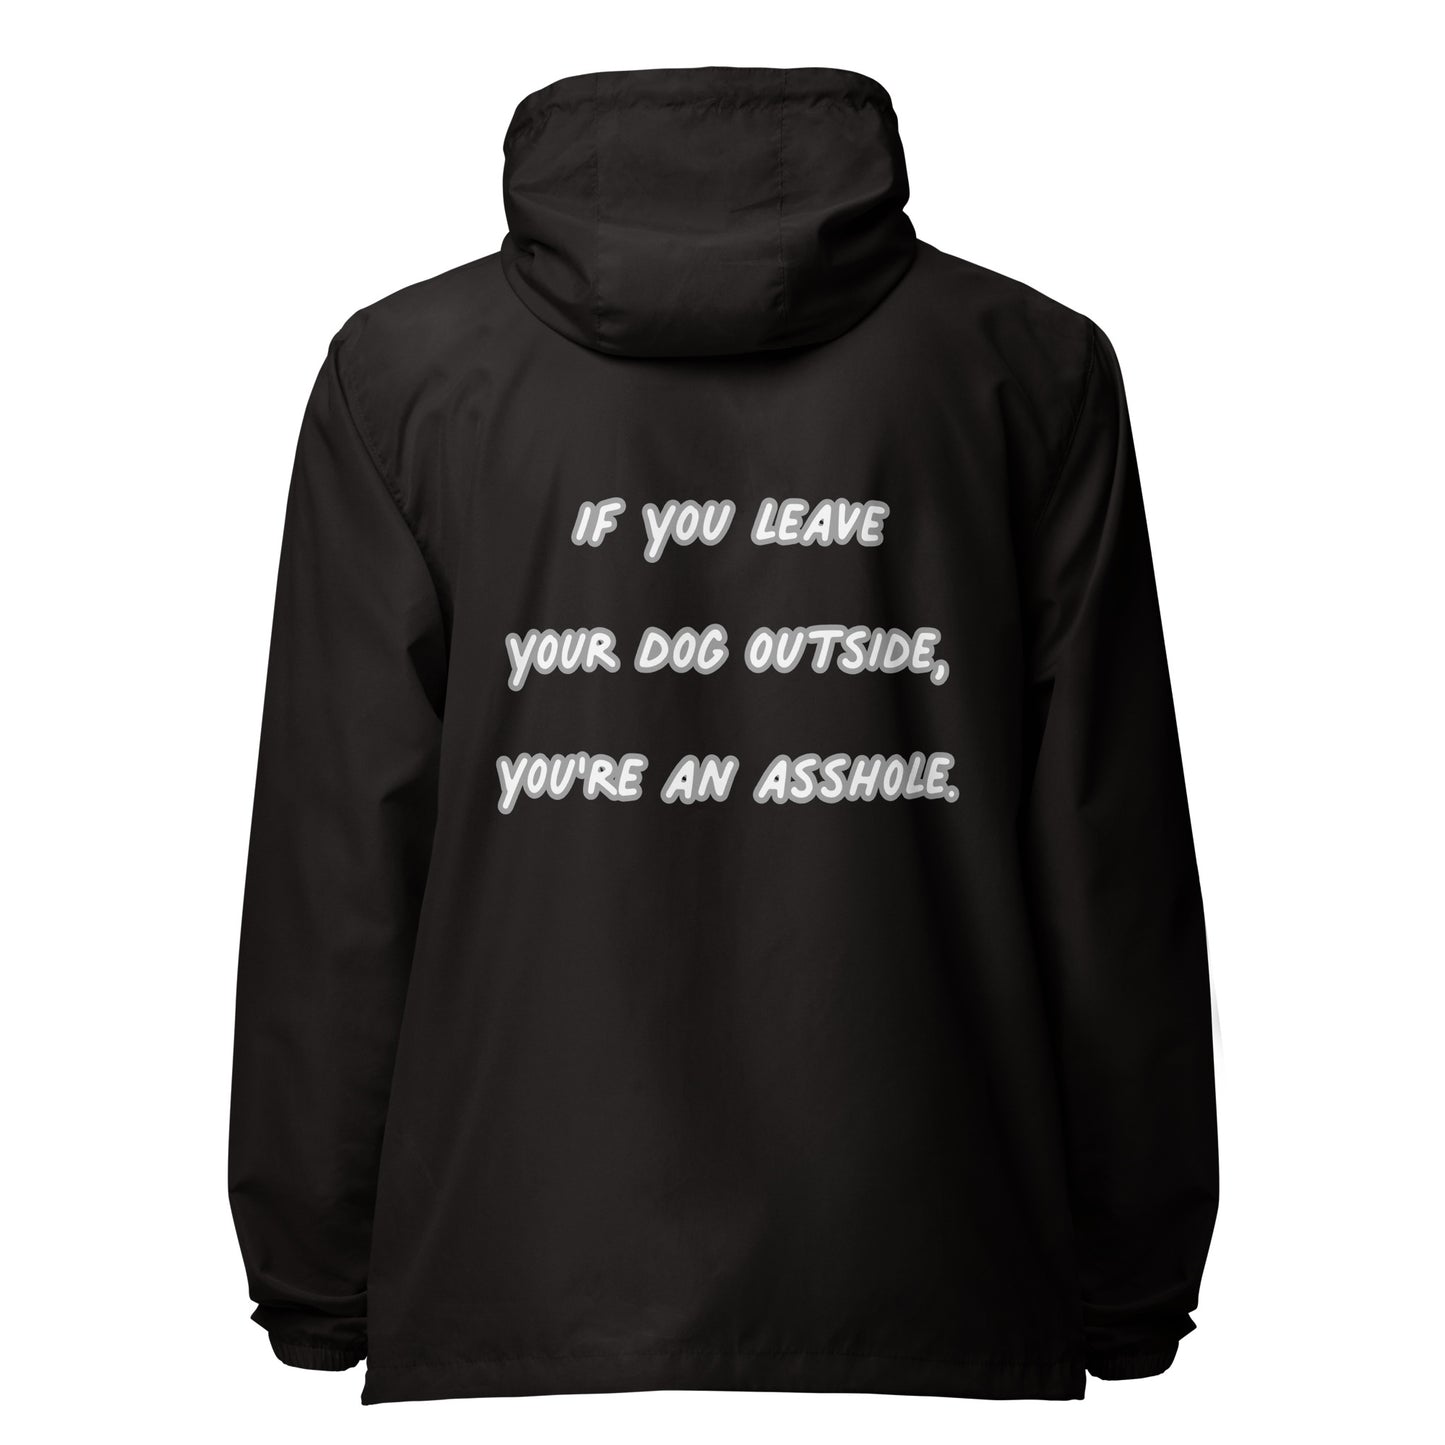 If You Leave Your Dog Outside You're An Asshole Unisex Windbreaker